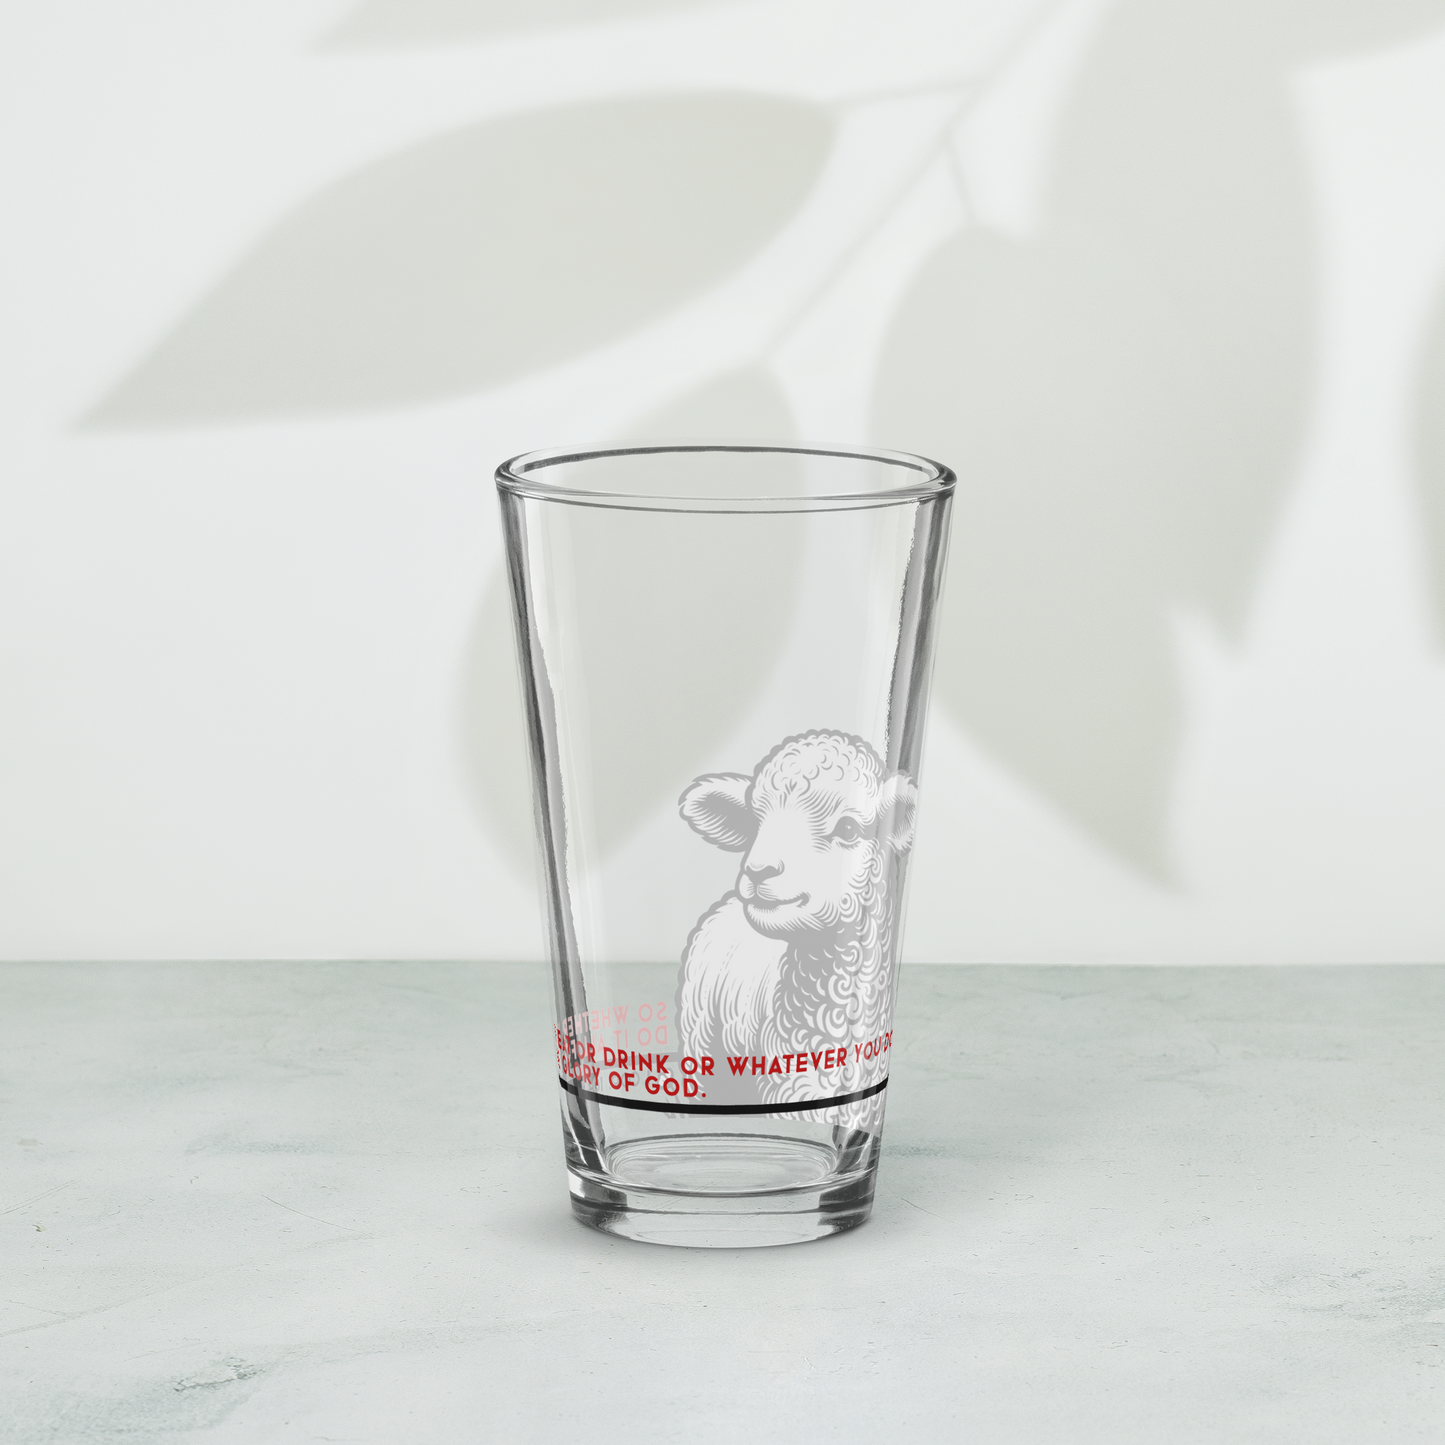 The Lamb Shaker Pint Glass by Raul Anthony Monge